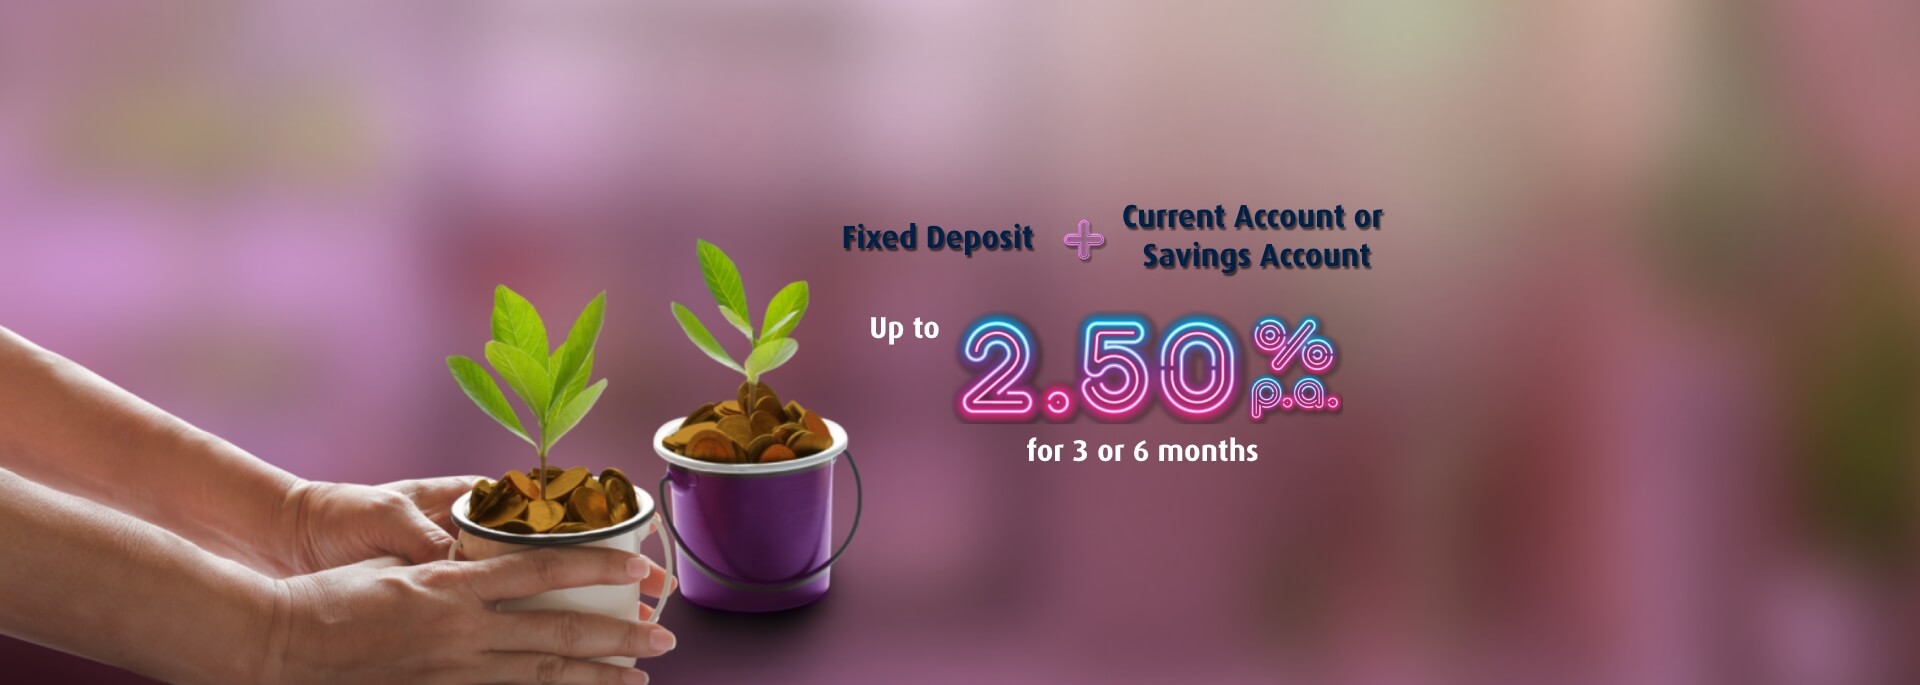 Fixed Deposit With Current Or Savings Account Promotion Hong Leong Bank